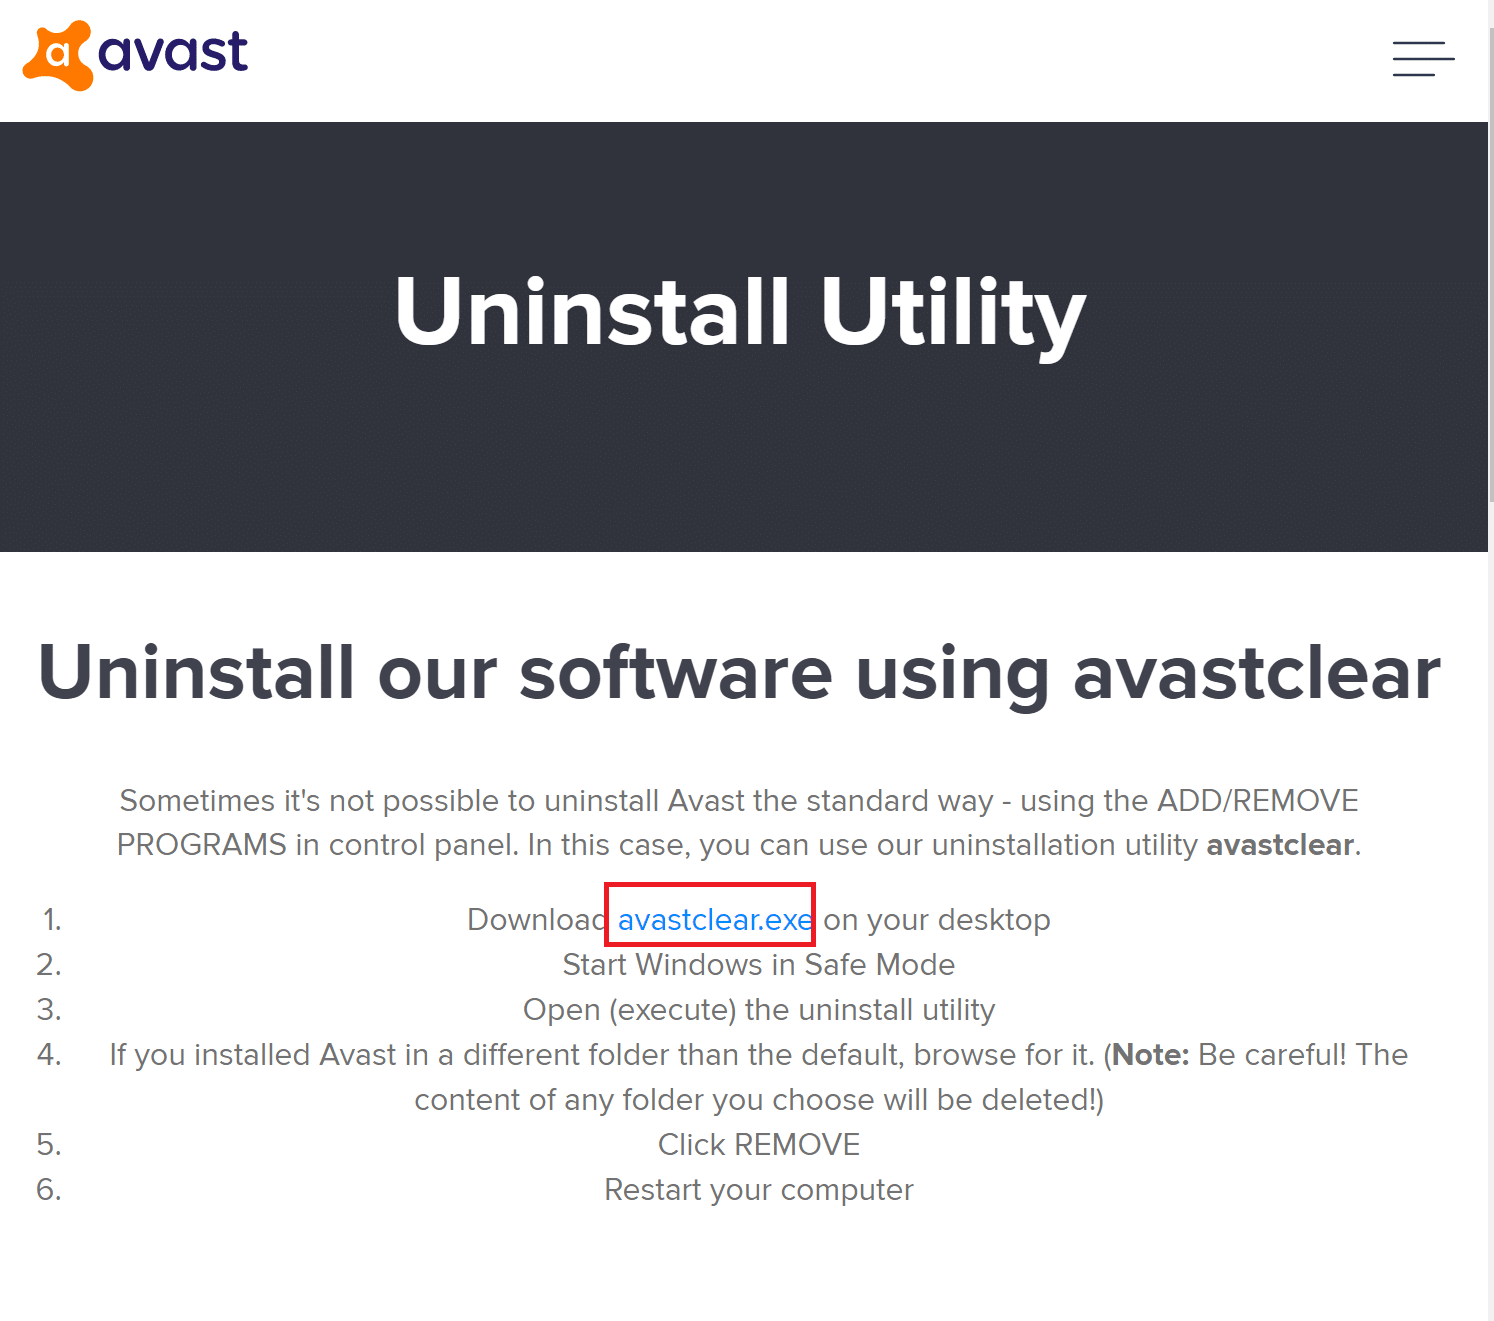 Click on Download Avastclear.exe to get the Avast Uninstall Utility